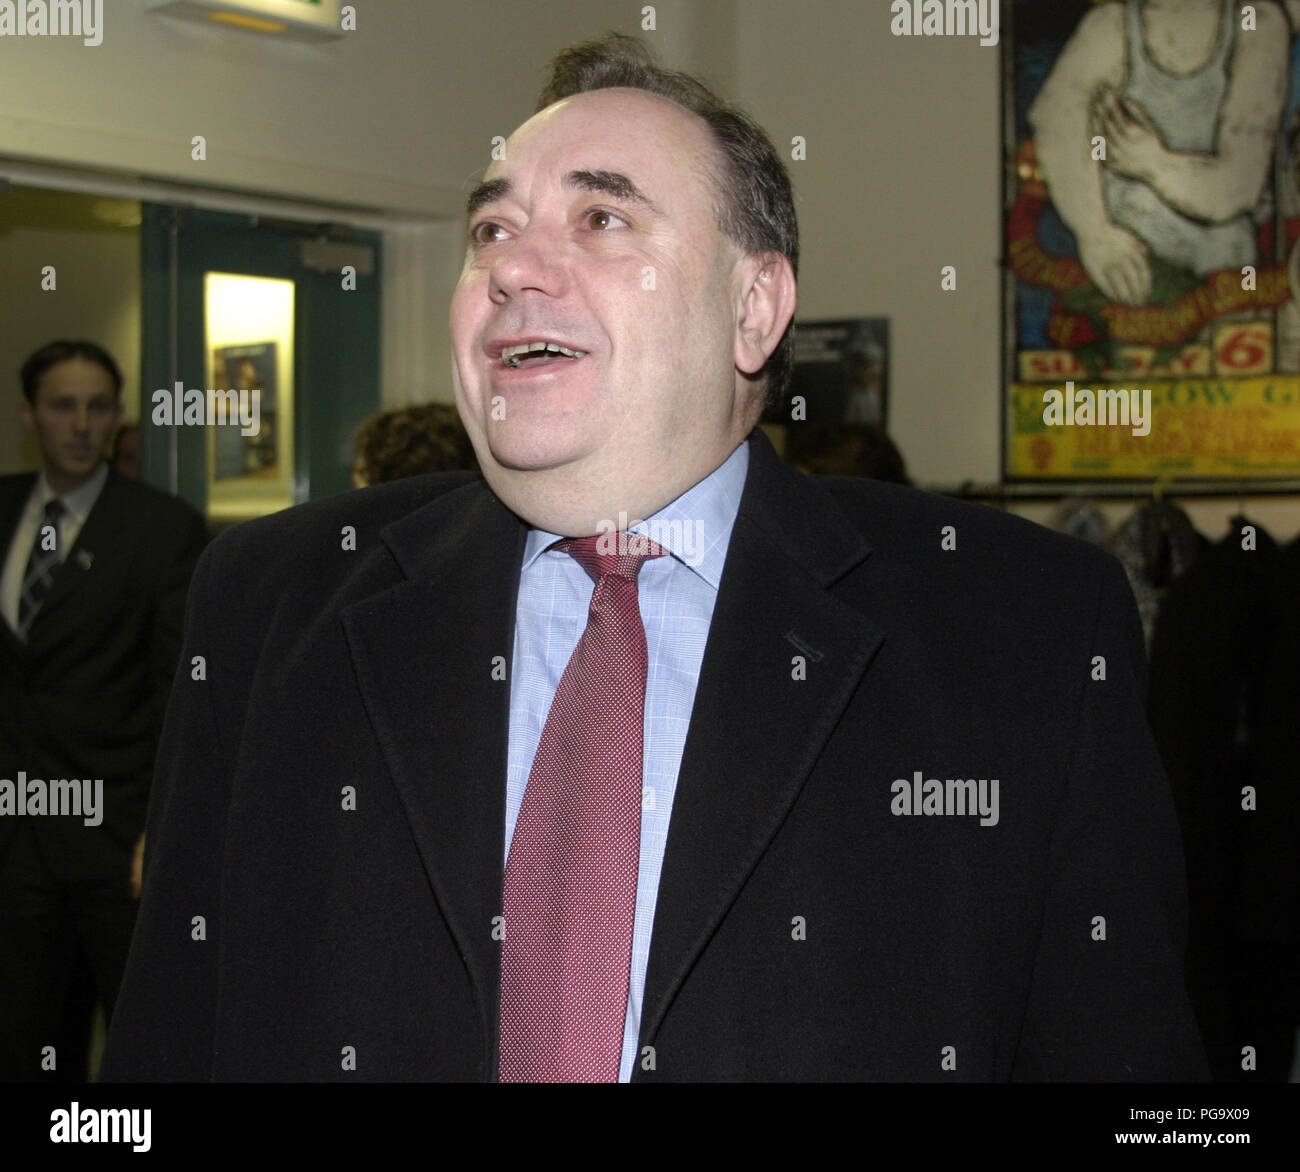 Alex Salmond. The former leader and MSP of the Scottish National Party in Scotland. Stock Photo